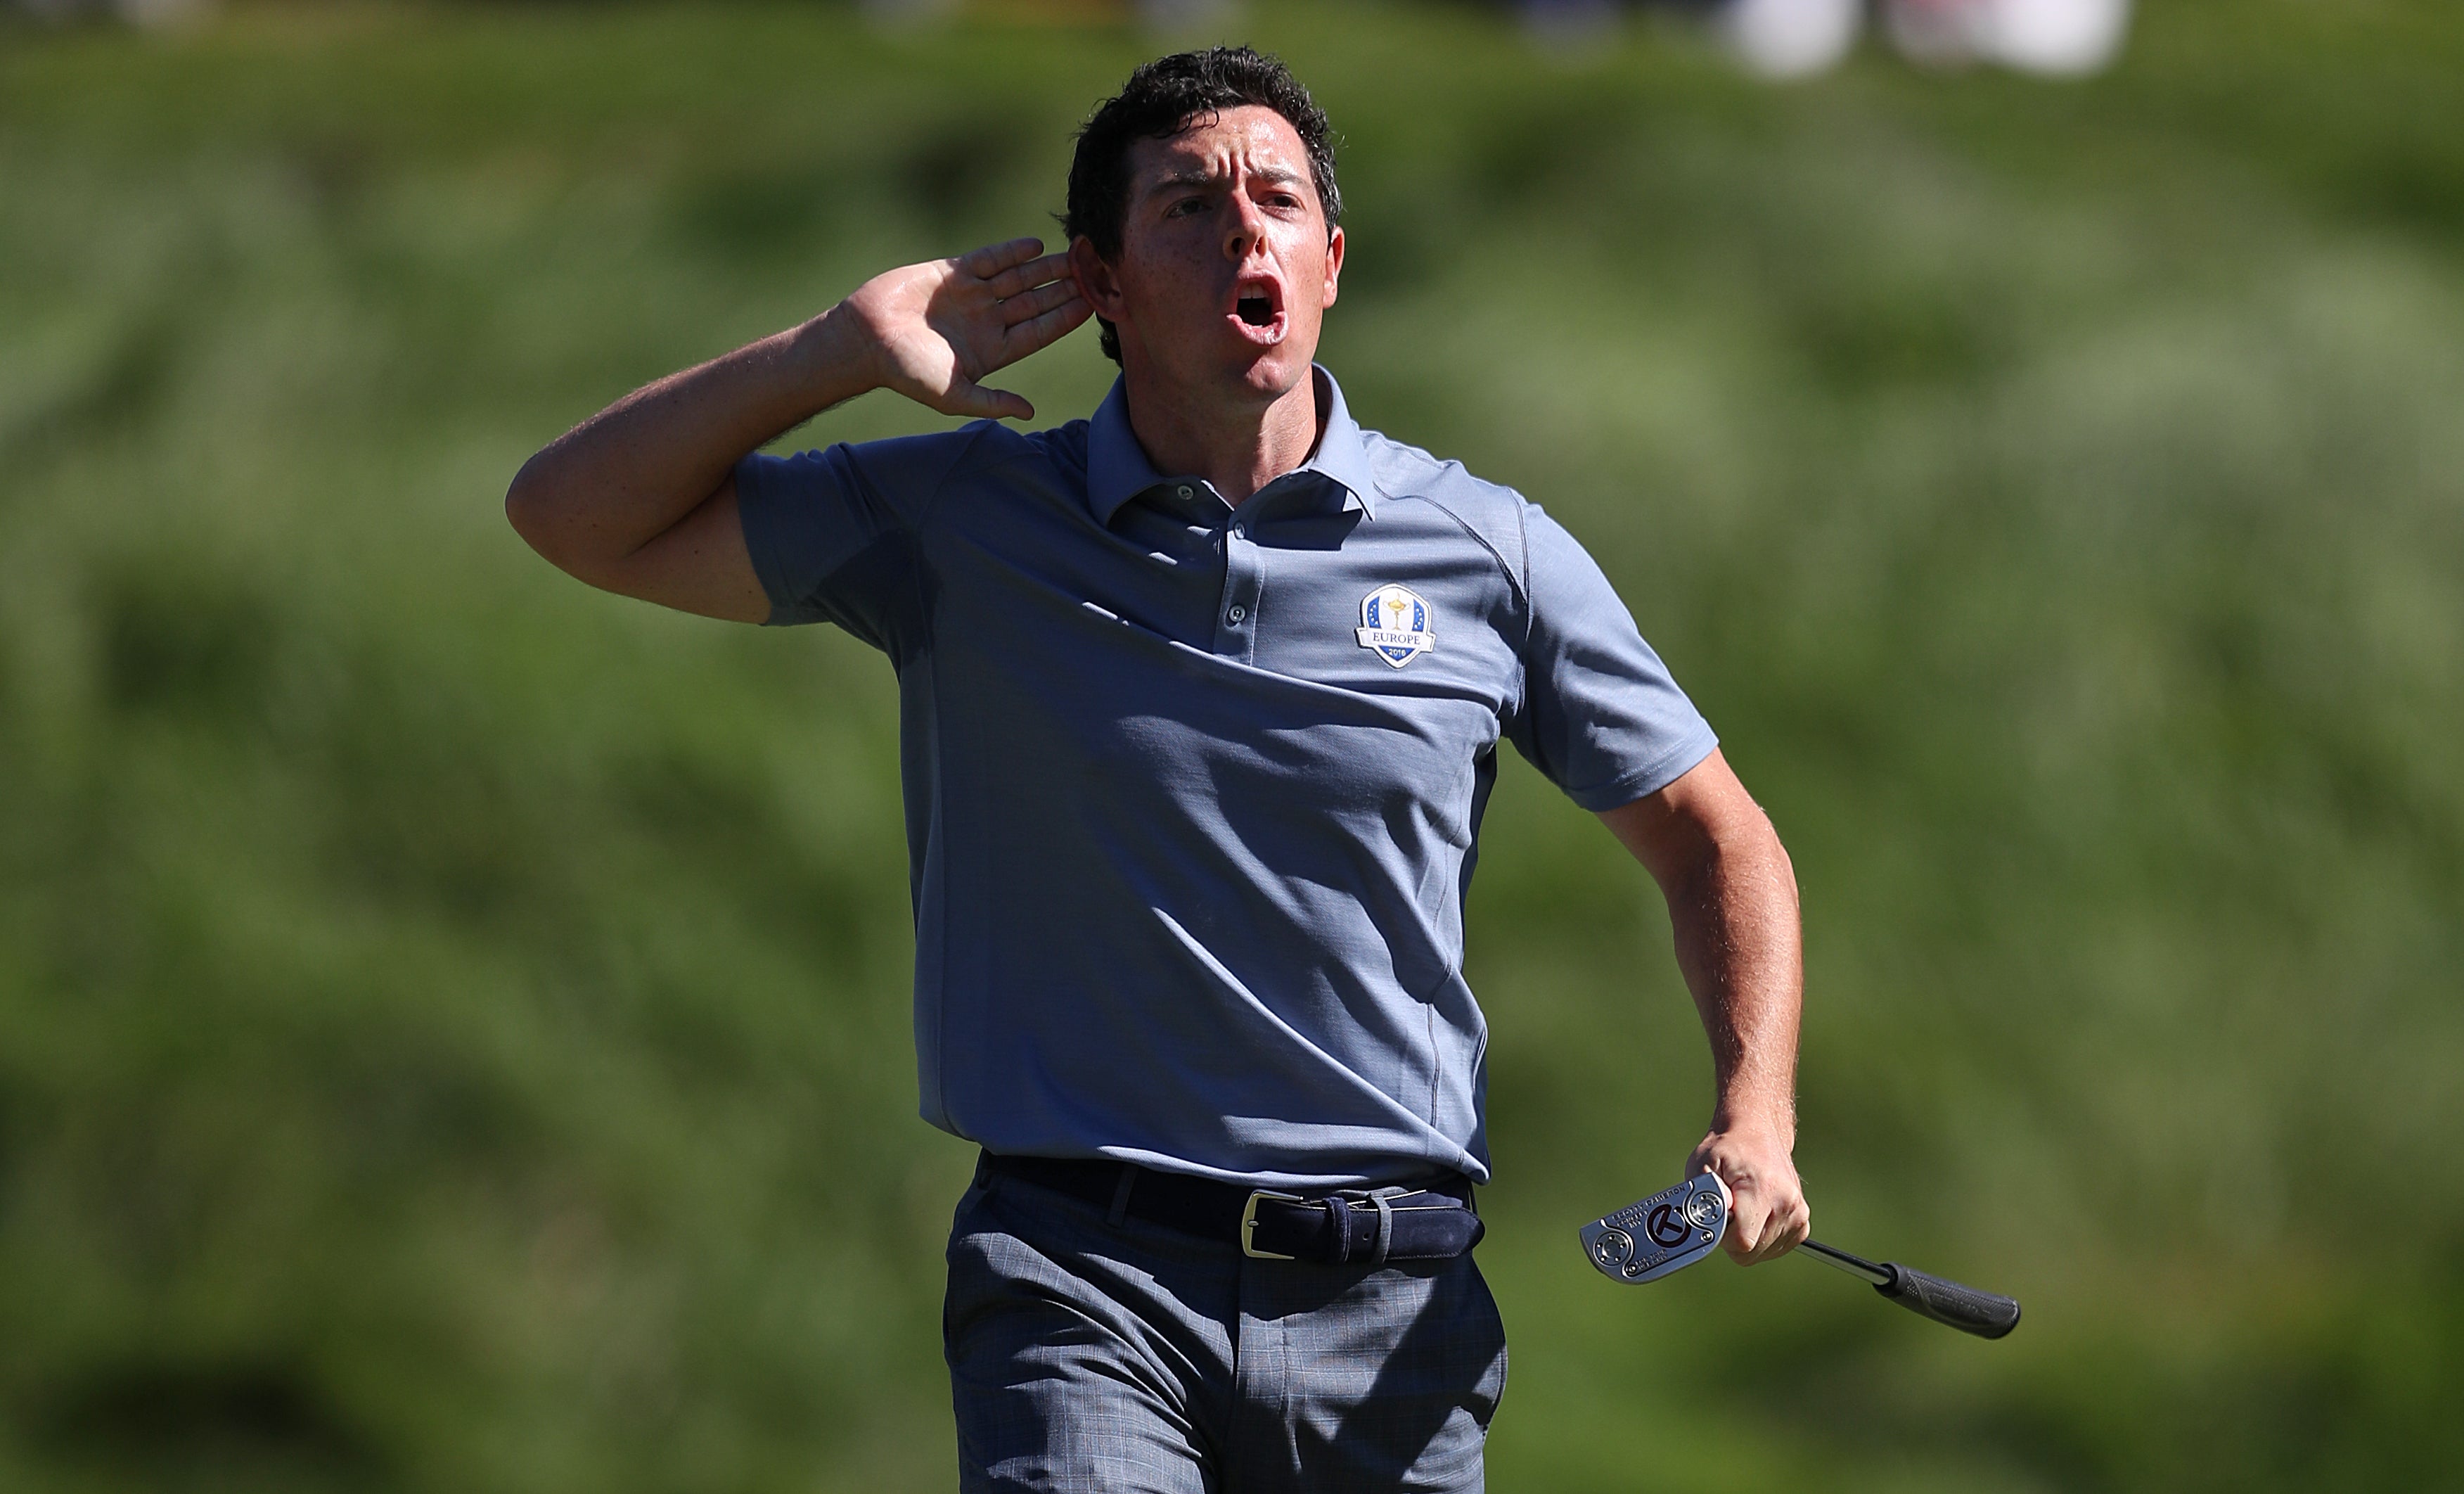 Rory McIlroy celebrates his putt on the eighth hole during the singles matches on day three of the 41st Ryder Cup at Hazeltine (David Davies/PA)